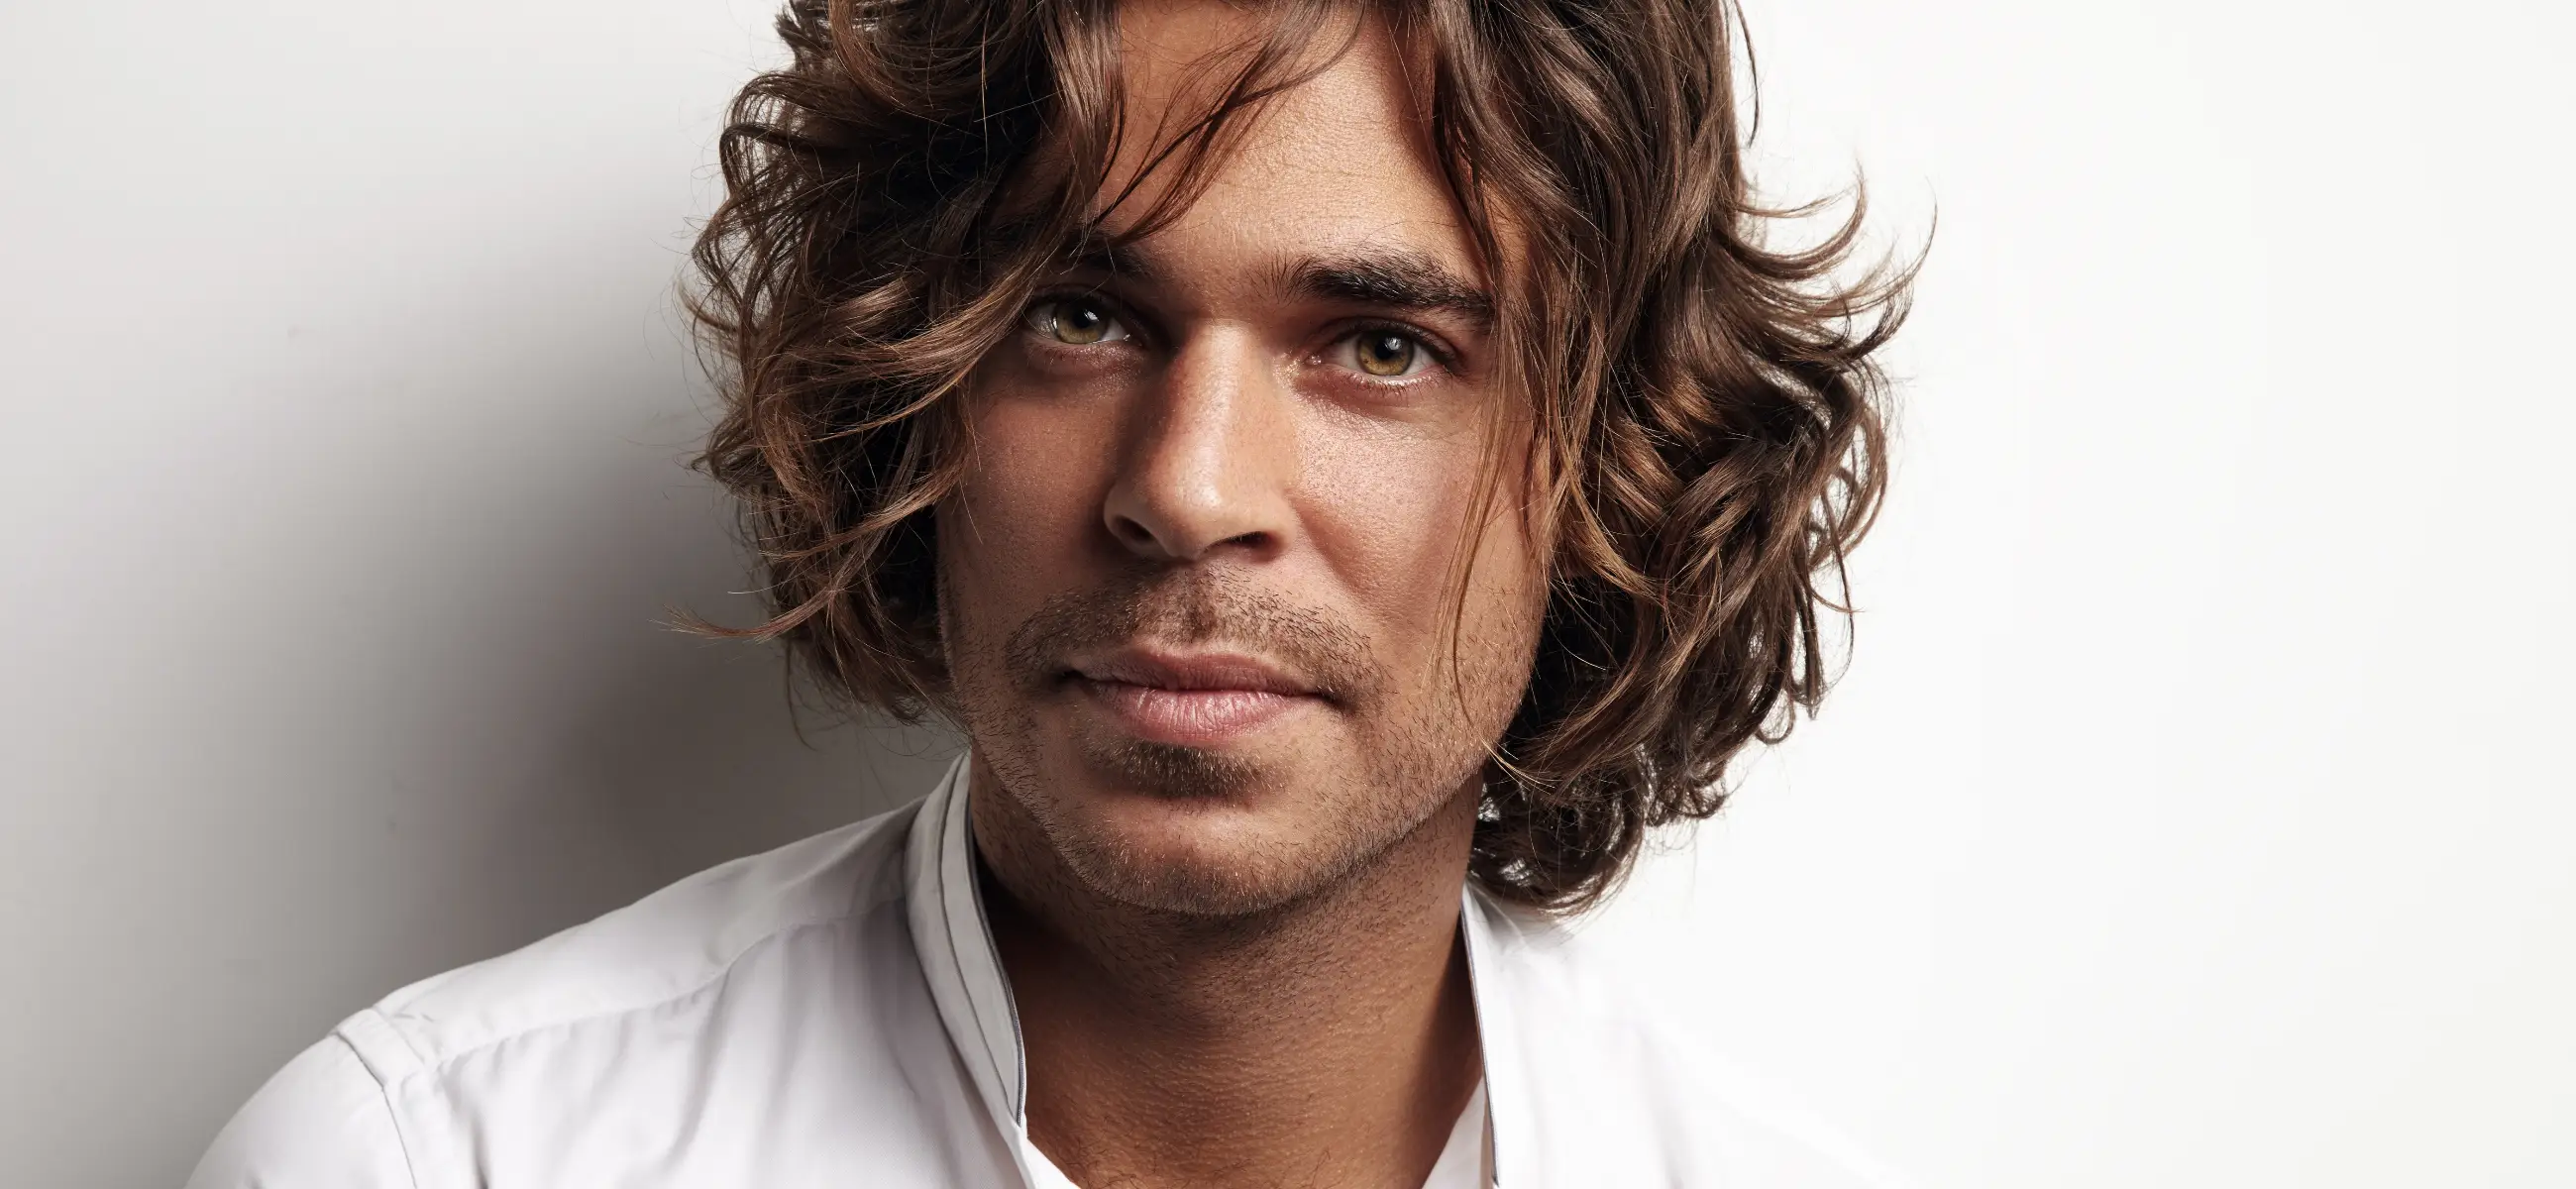 From the wolfcut to the perm - 7 haircuts for curly hair men 